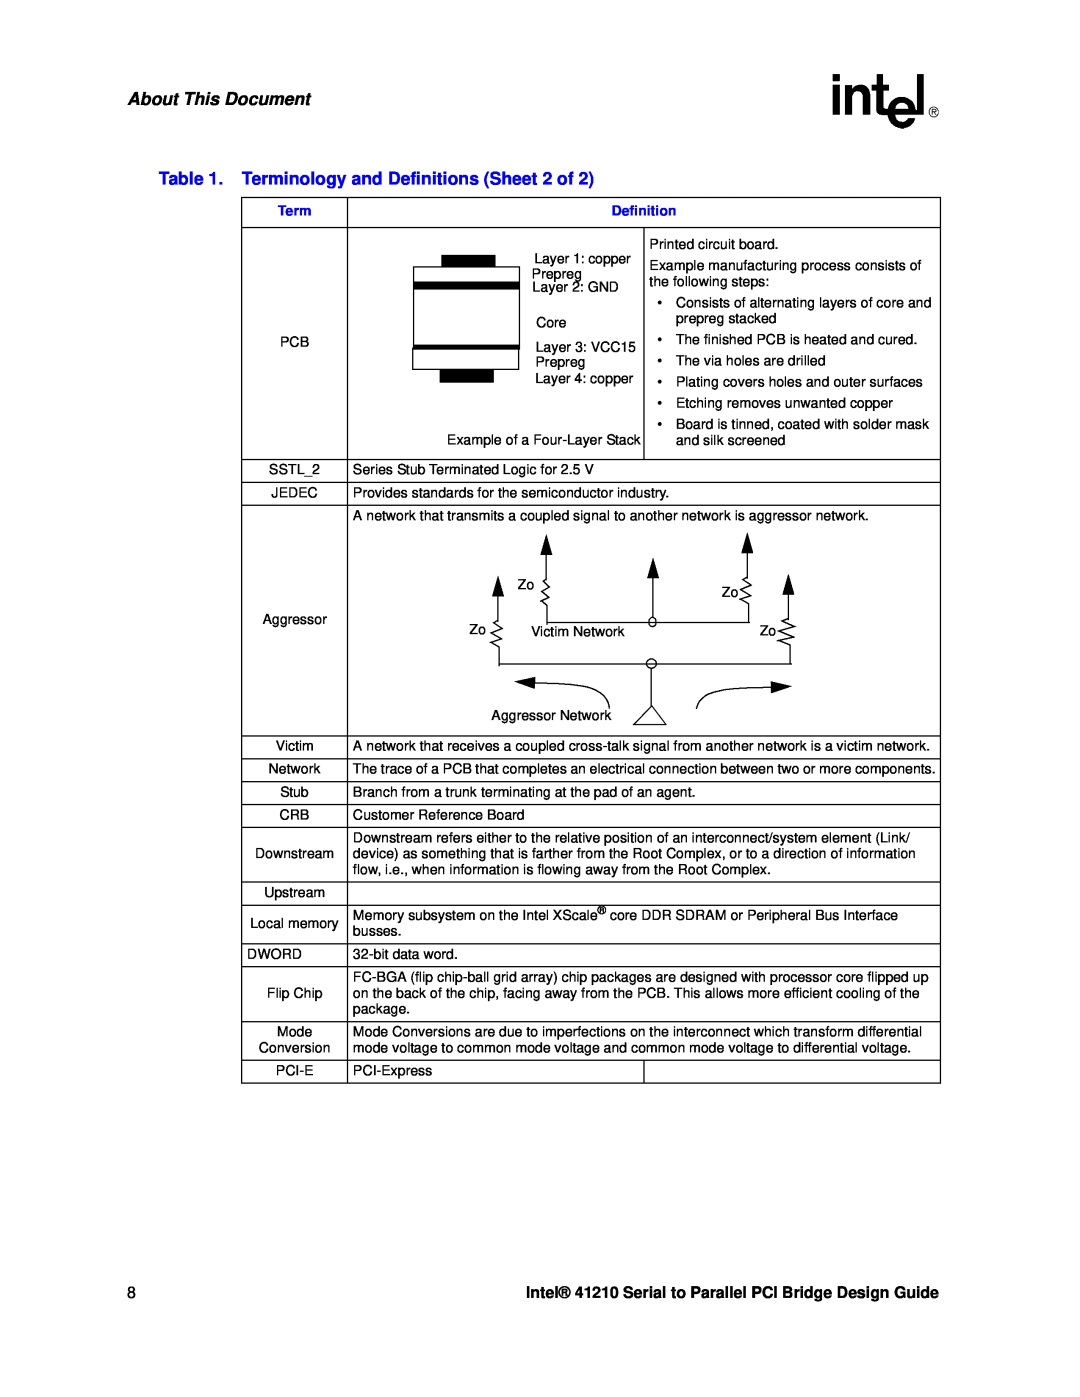 Intel 41210 manual About This Document, Terminology and Definitions Sheet 2 of 